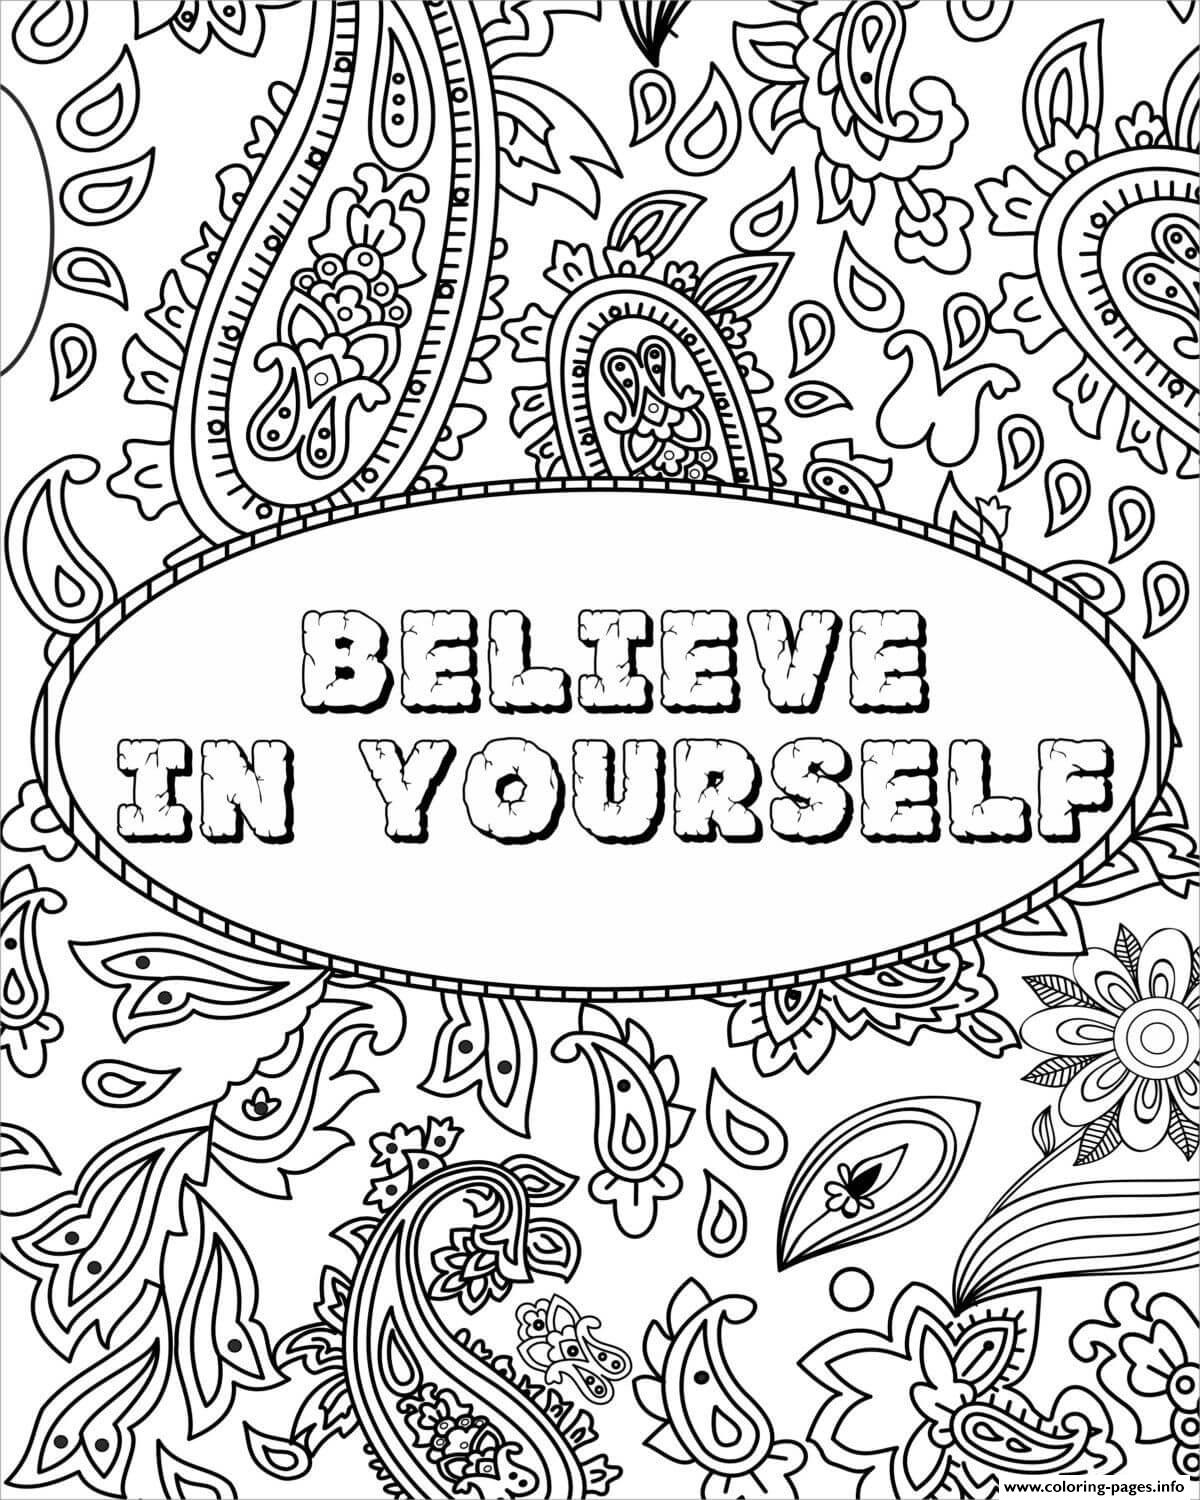 Believe In Yourself Vsco Girl Coloring page Printable